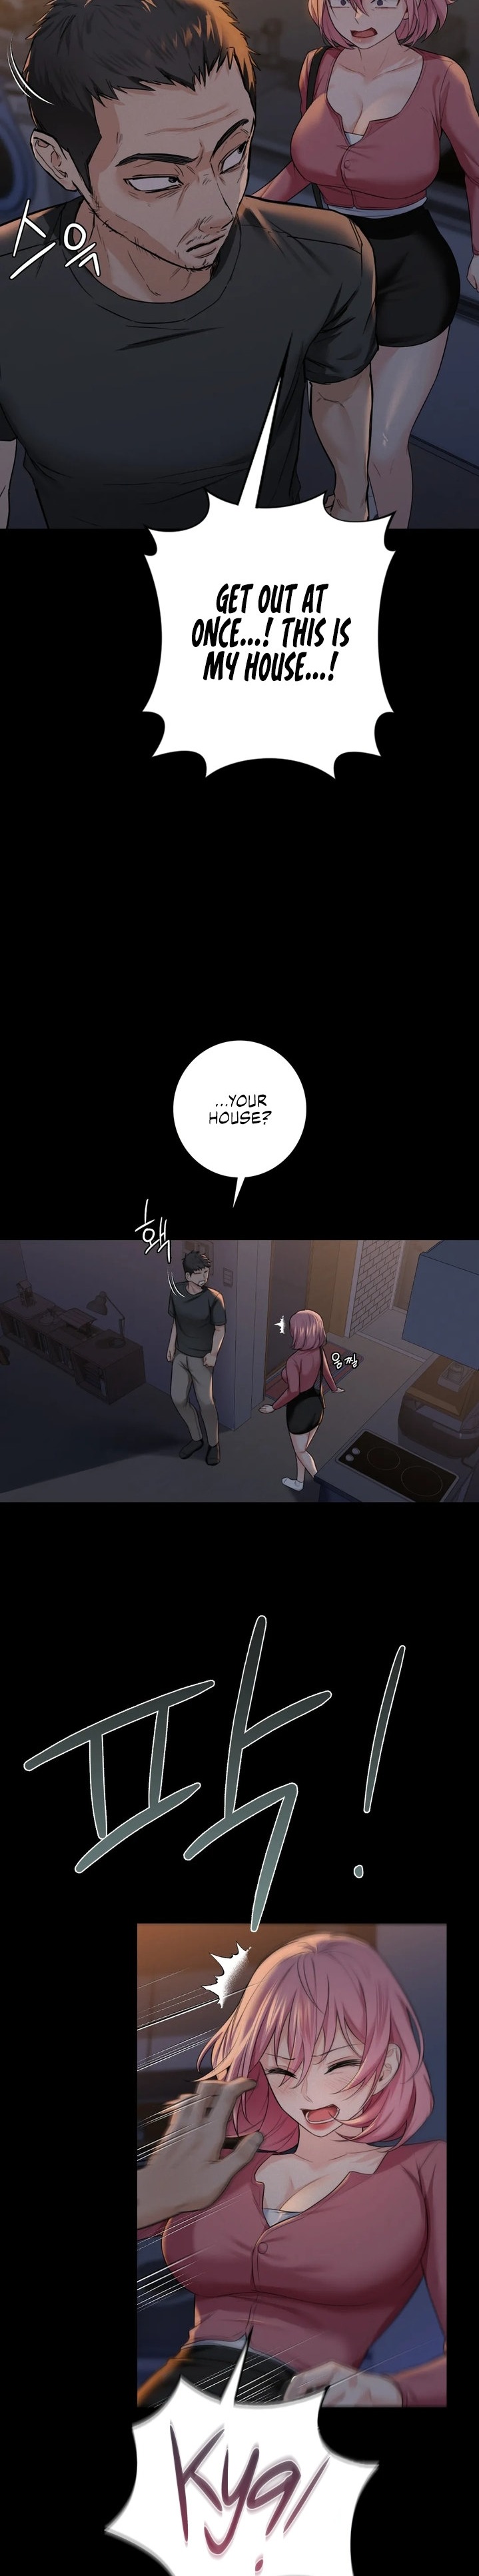 Not a friend – What do I call her as? - Chapter 25 Page 11